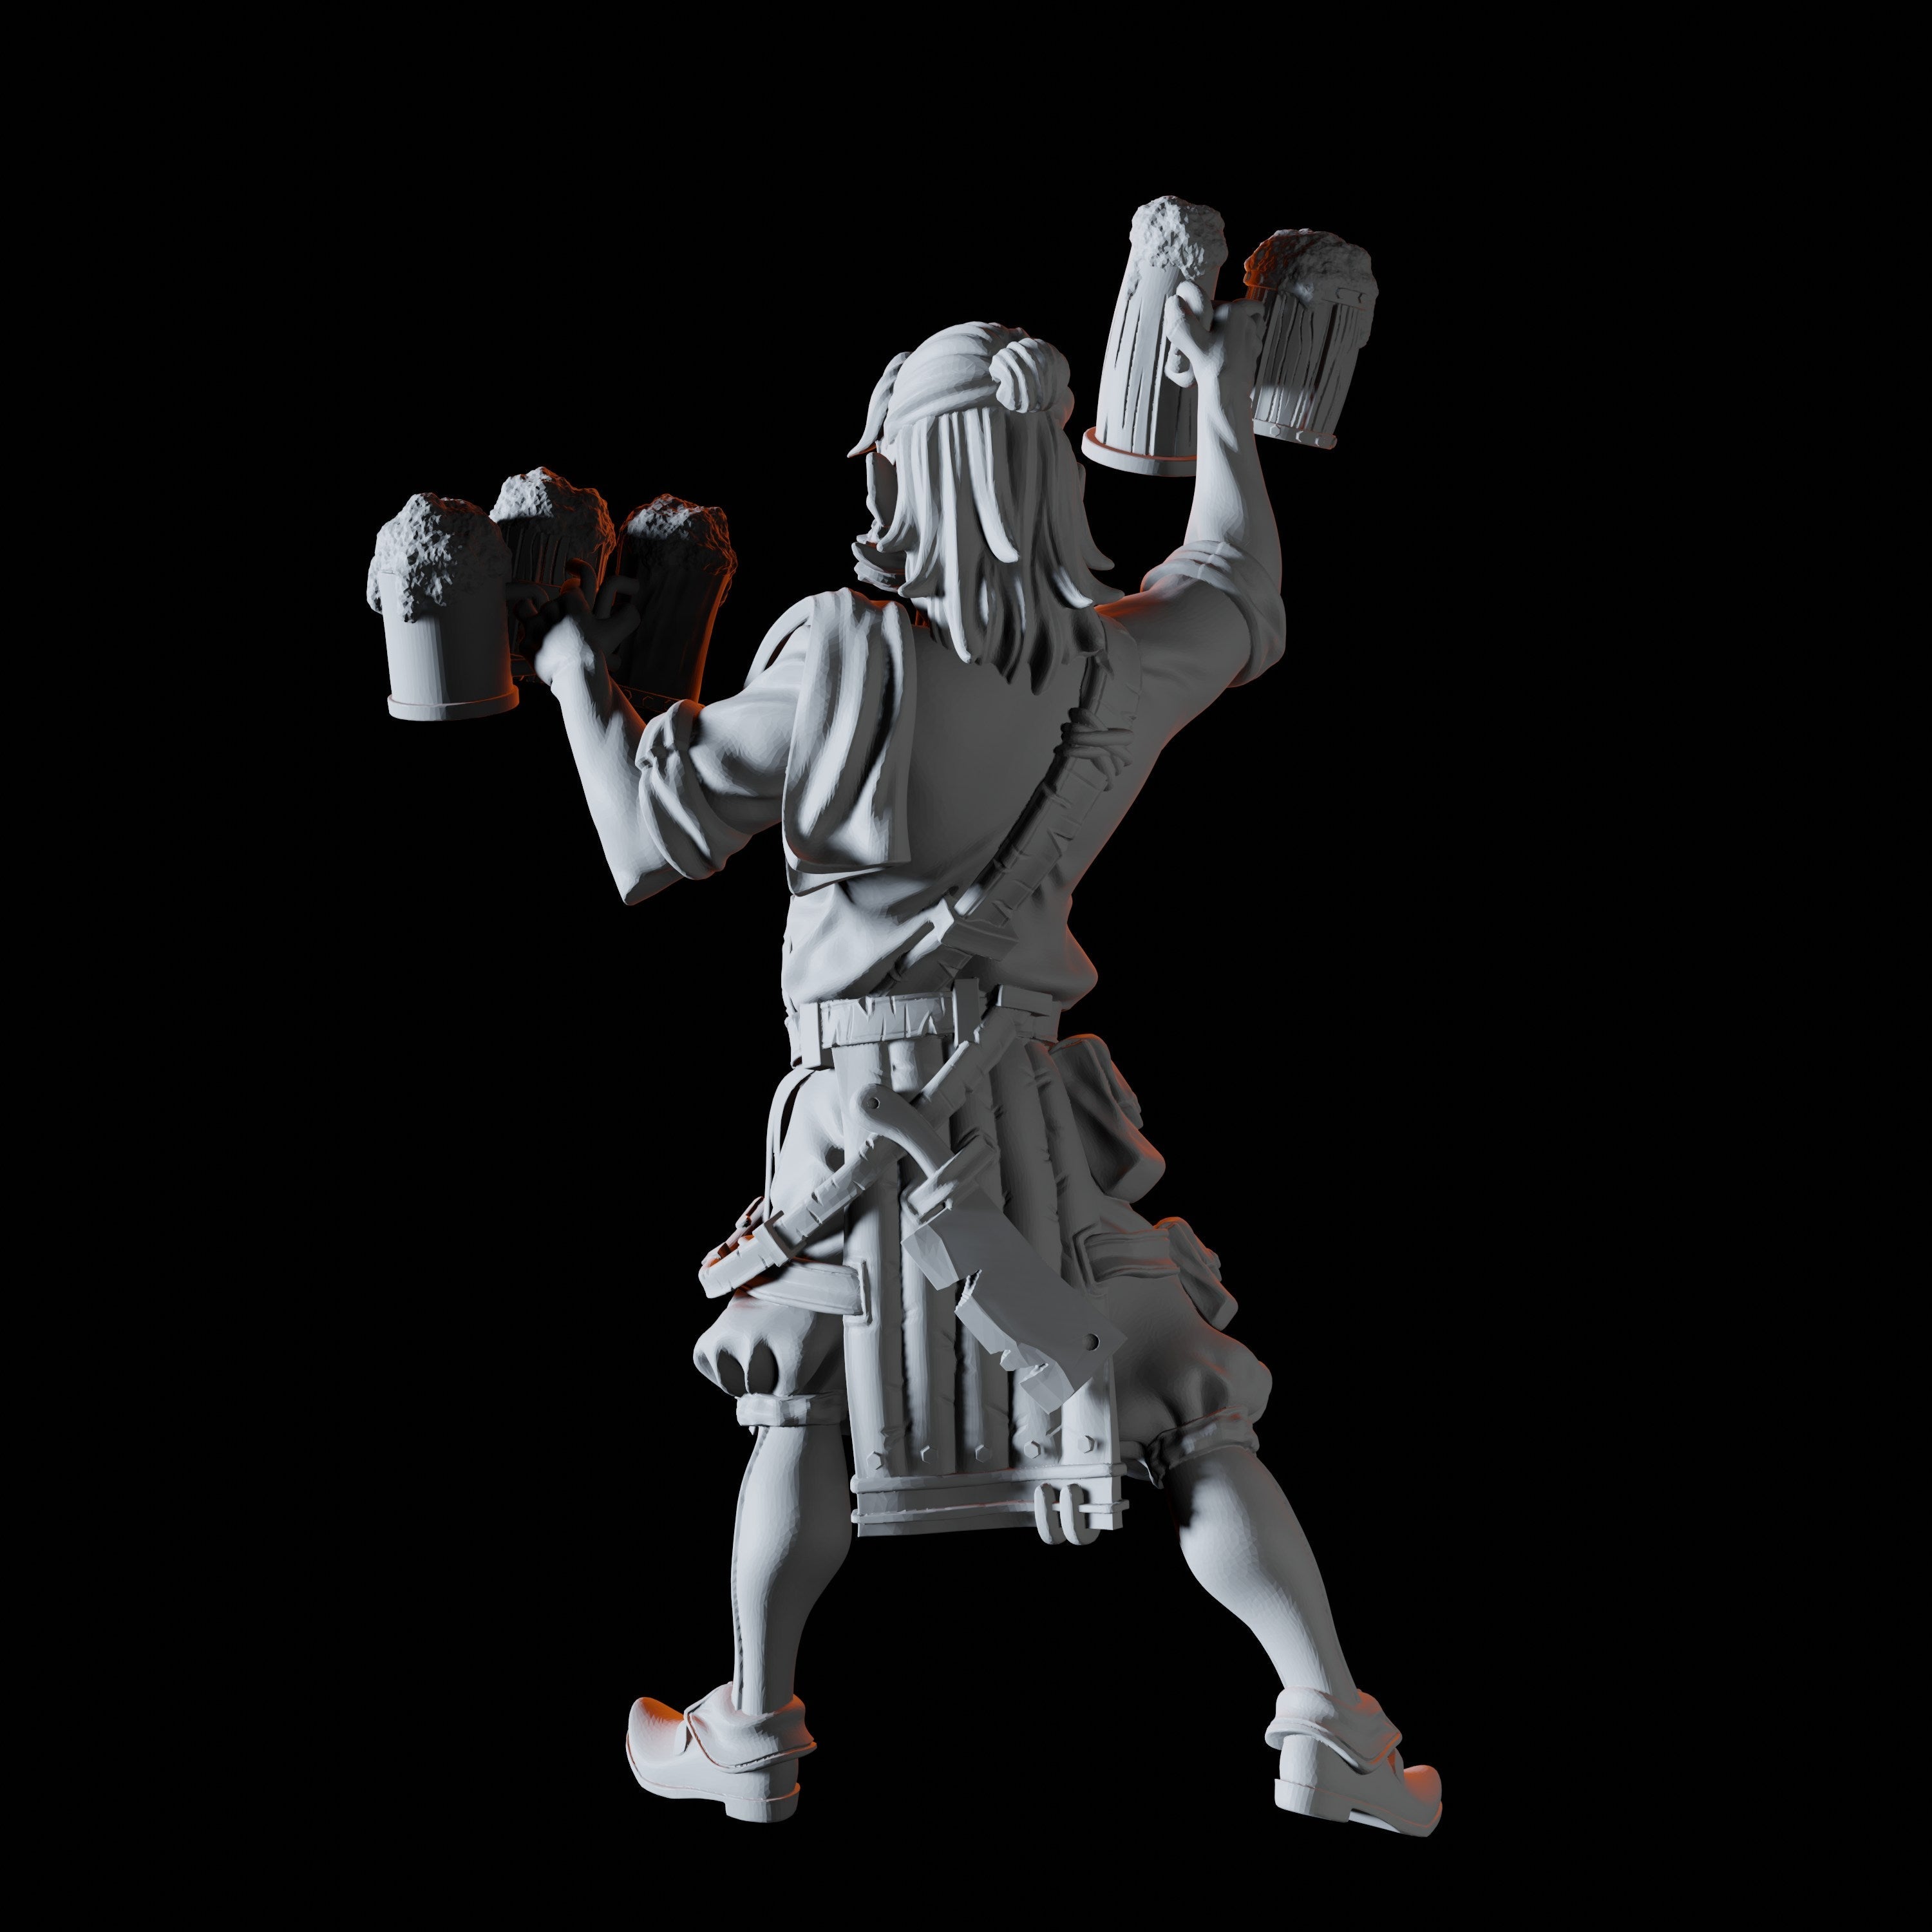 Jolly Innkeeper Miniature for Dungeons and Dragons - Myth Forged